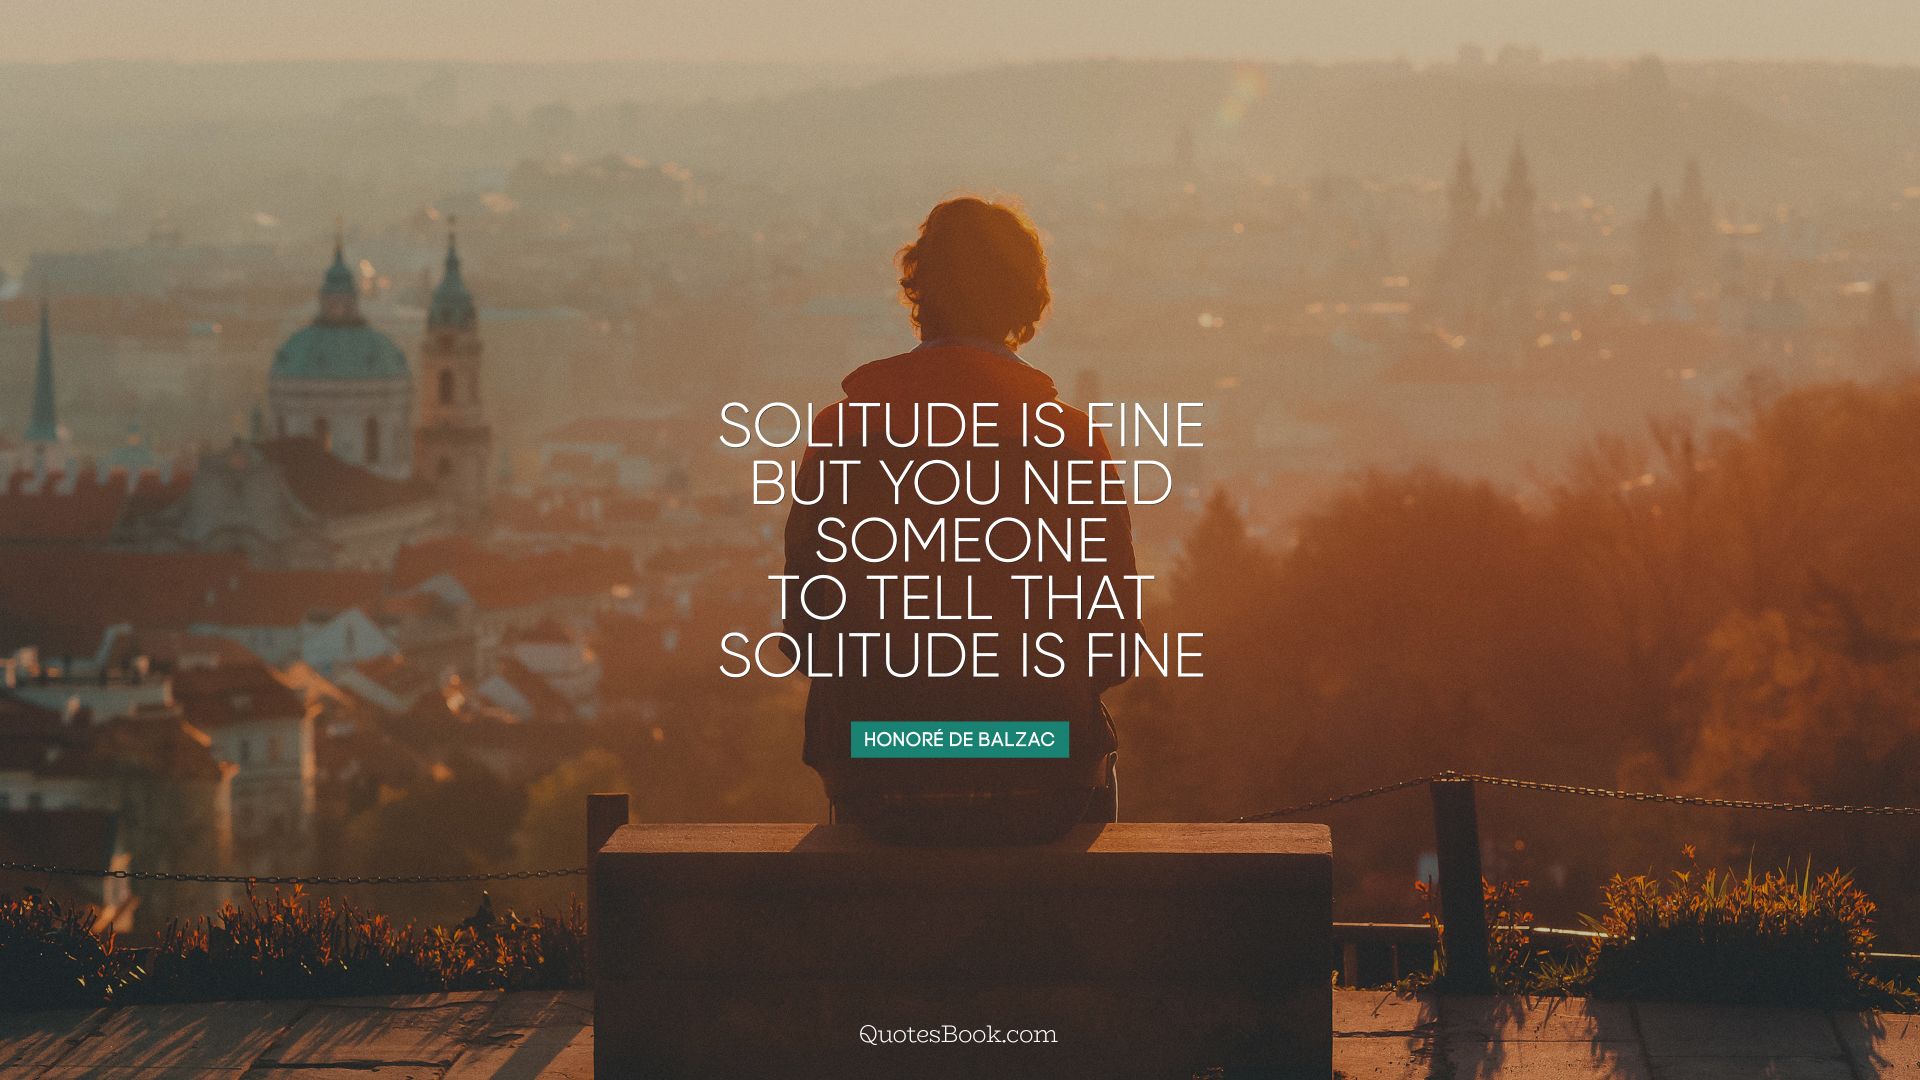 Solitude is fine but you need someone to tell that solitude is fine. - Quote by Honore de Balzac